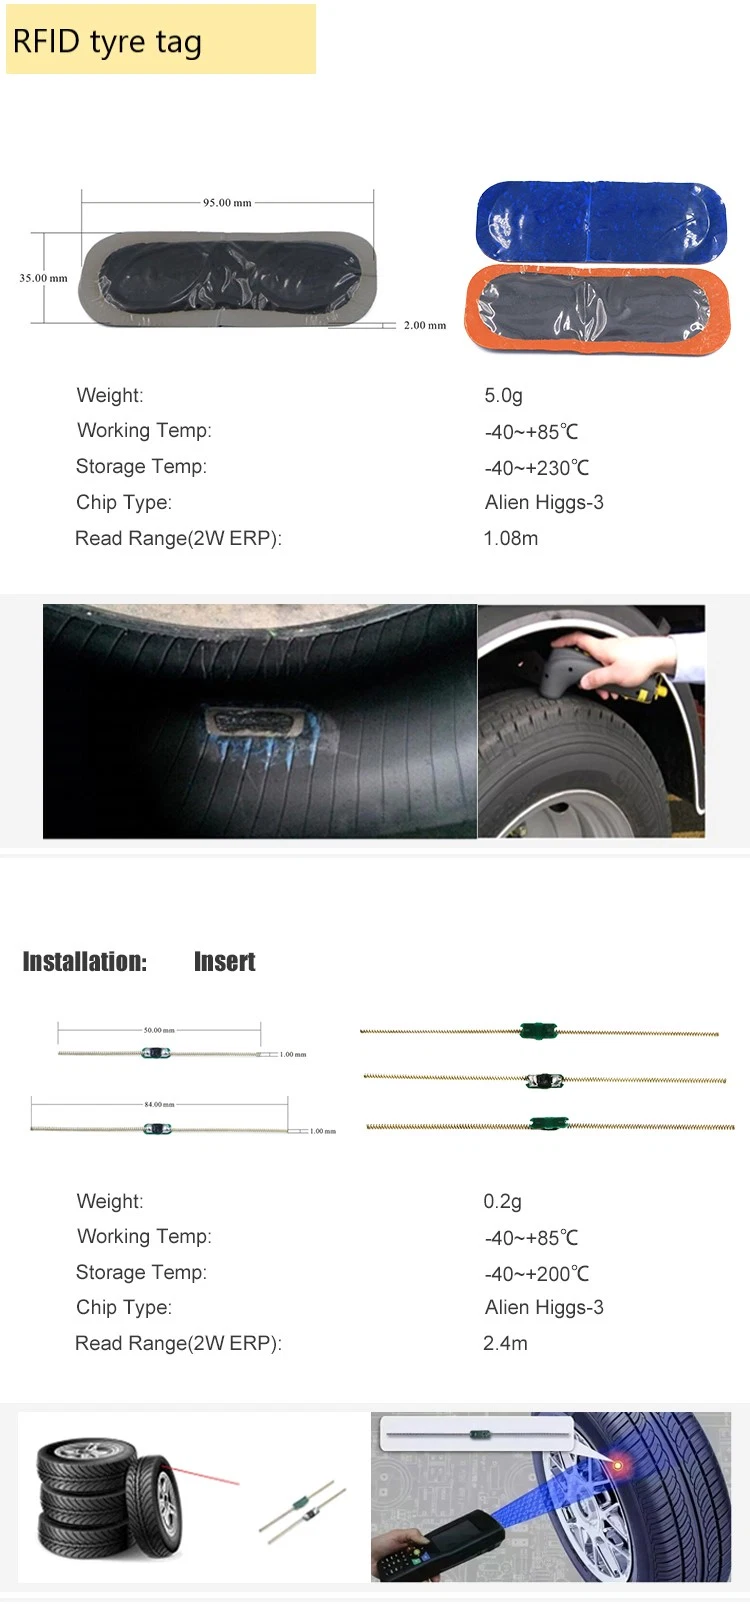 Tire Identification Tracking Management RFID Tag EPC Gen2 UHF High Temperature Resistance RFID Tags Tire Label